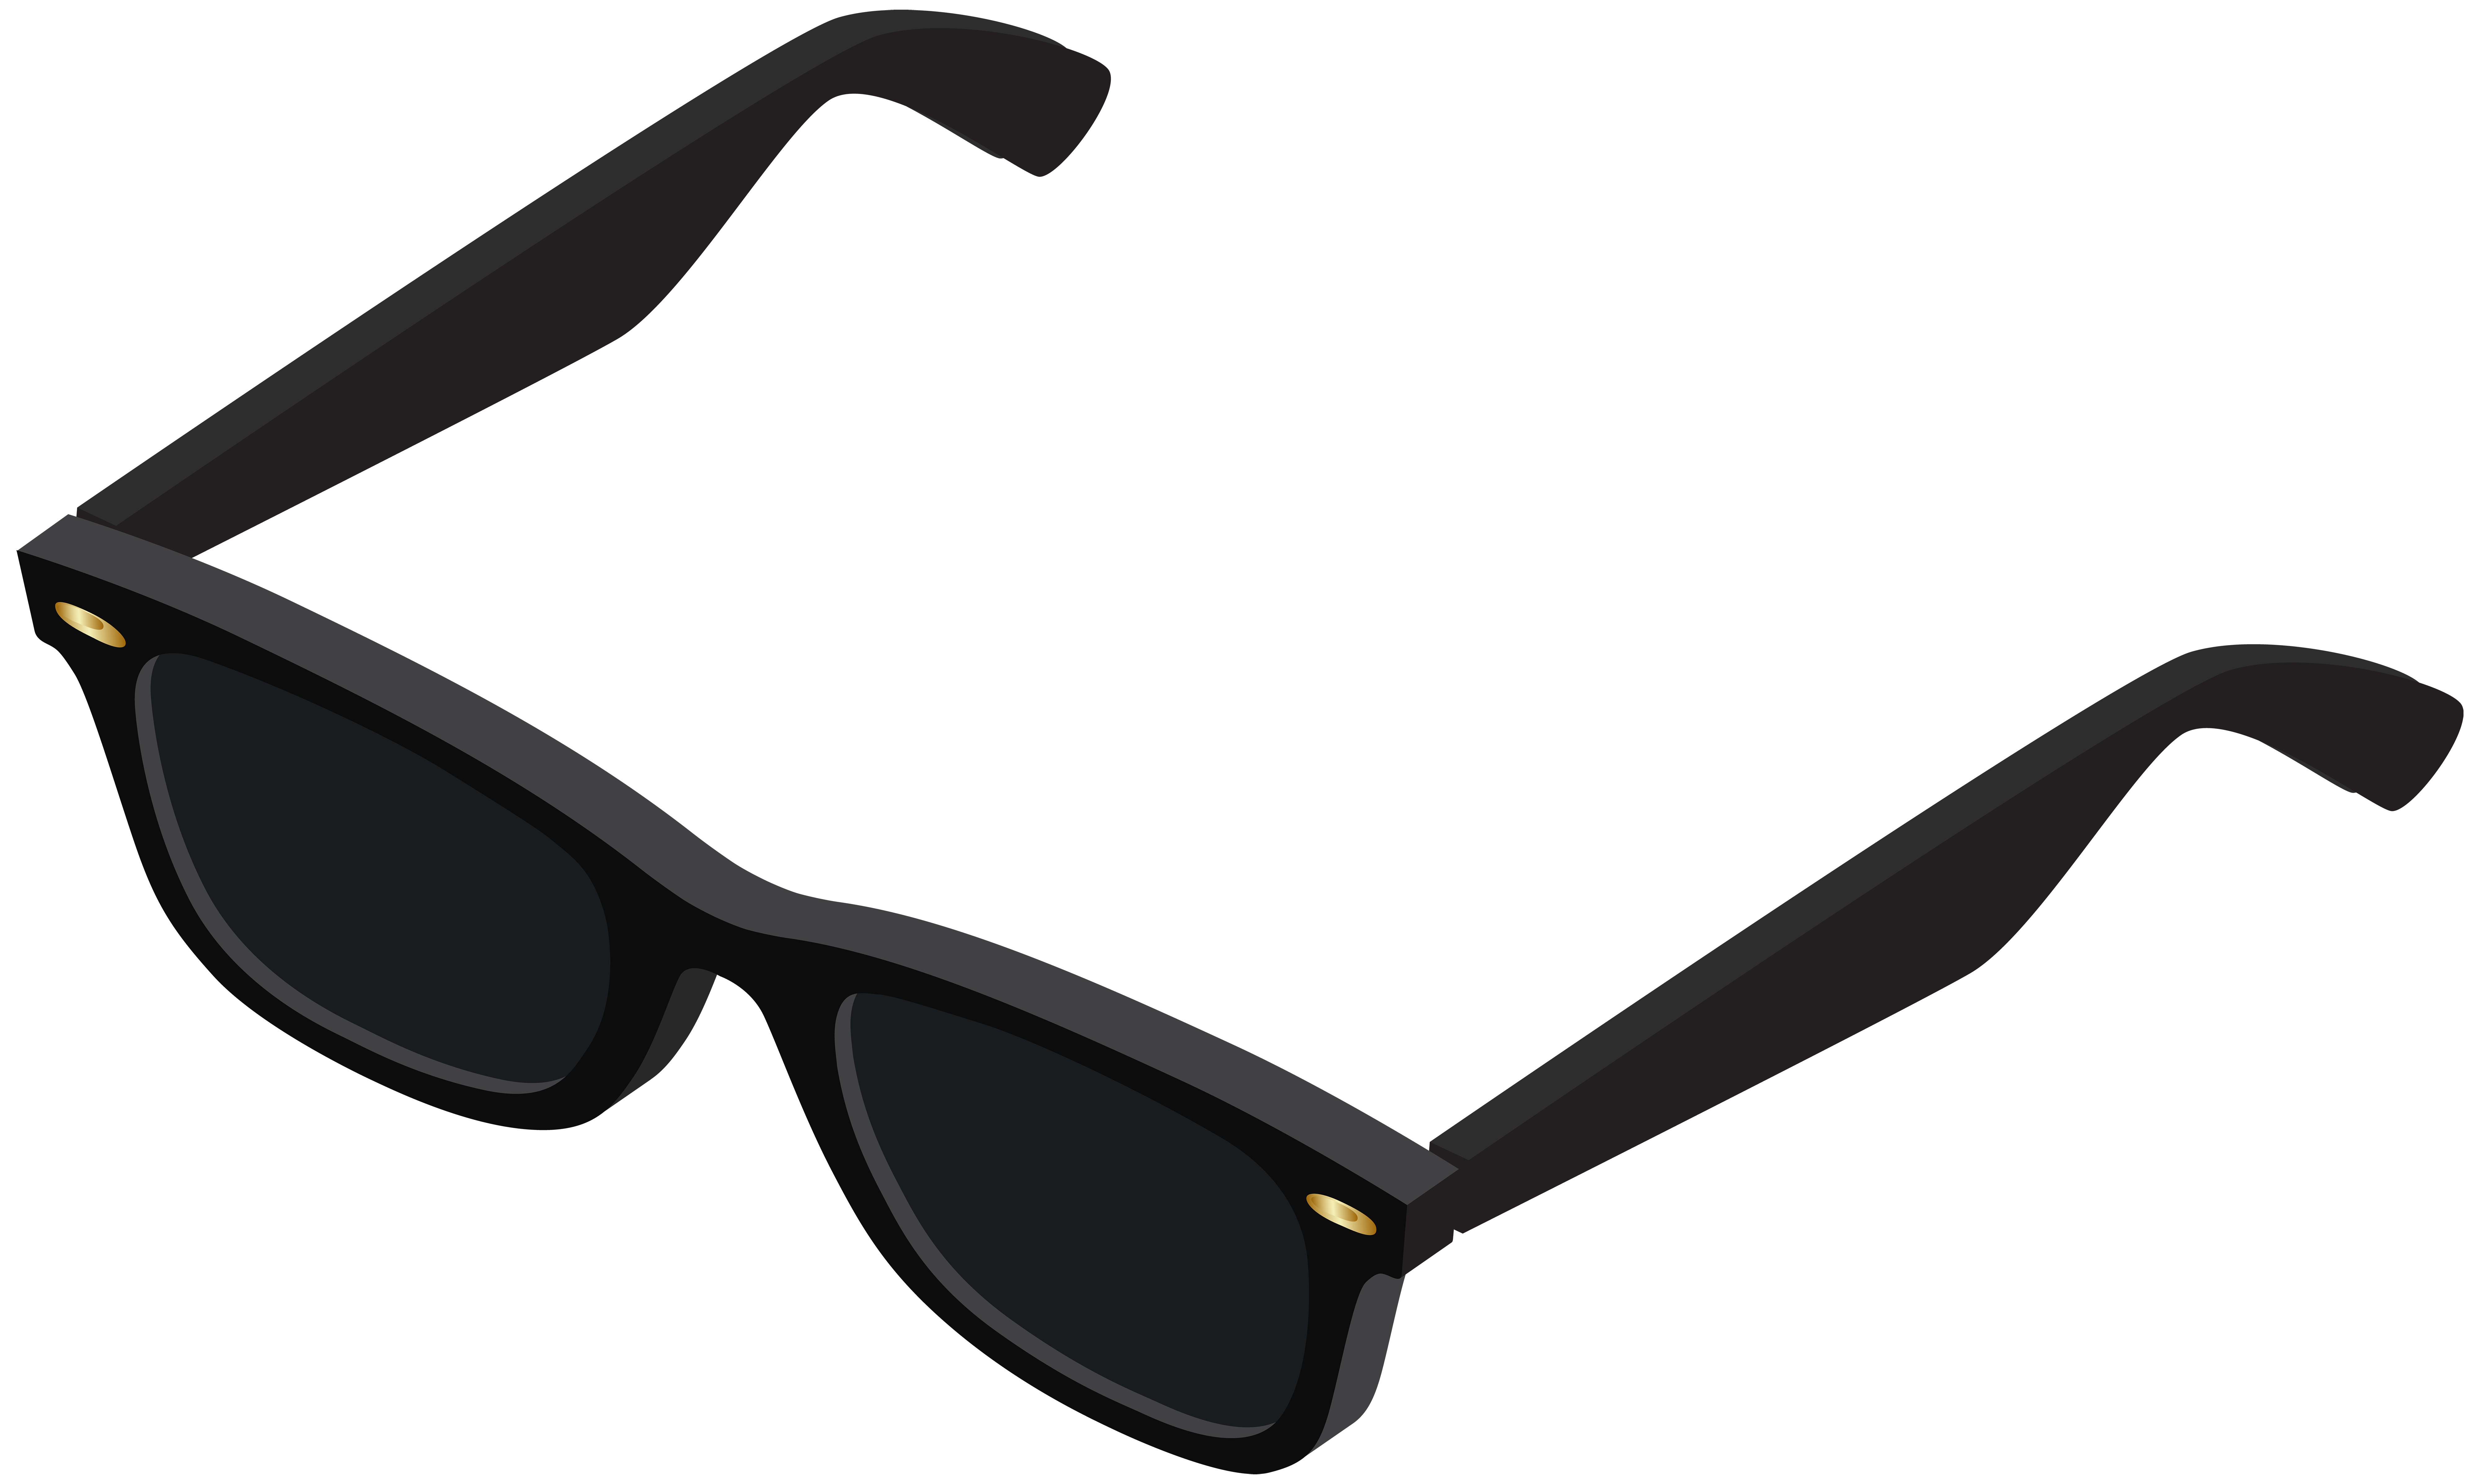 Black Sunglasses Transparent Png Image Gallery Yopriceville High Quality Images And Transparent Png Free Clipart